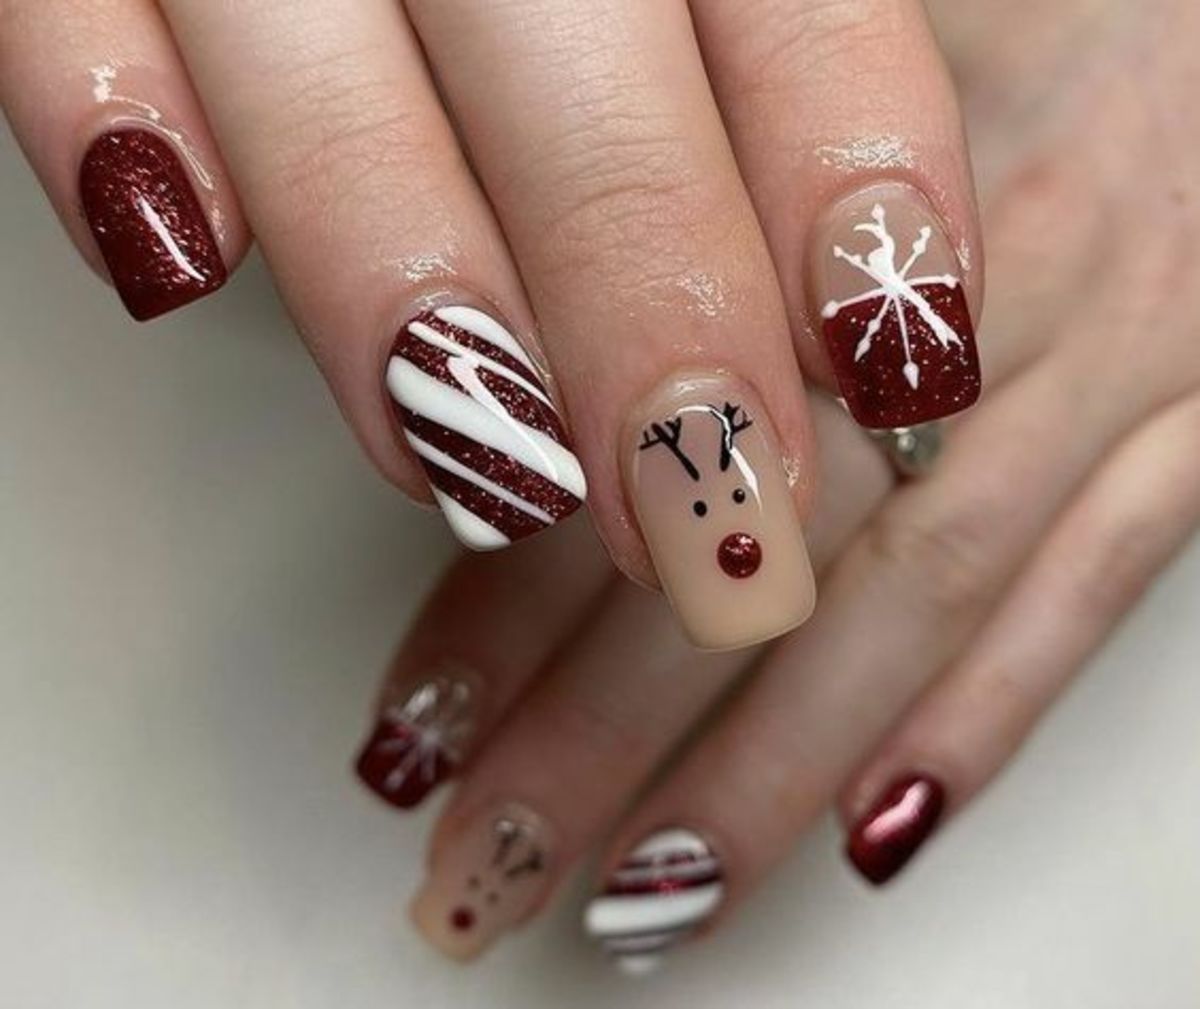 20 Christmas Nail Ideas To Inspire Your Next Holiday Manicure